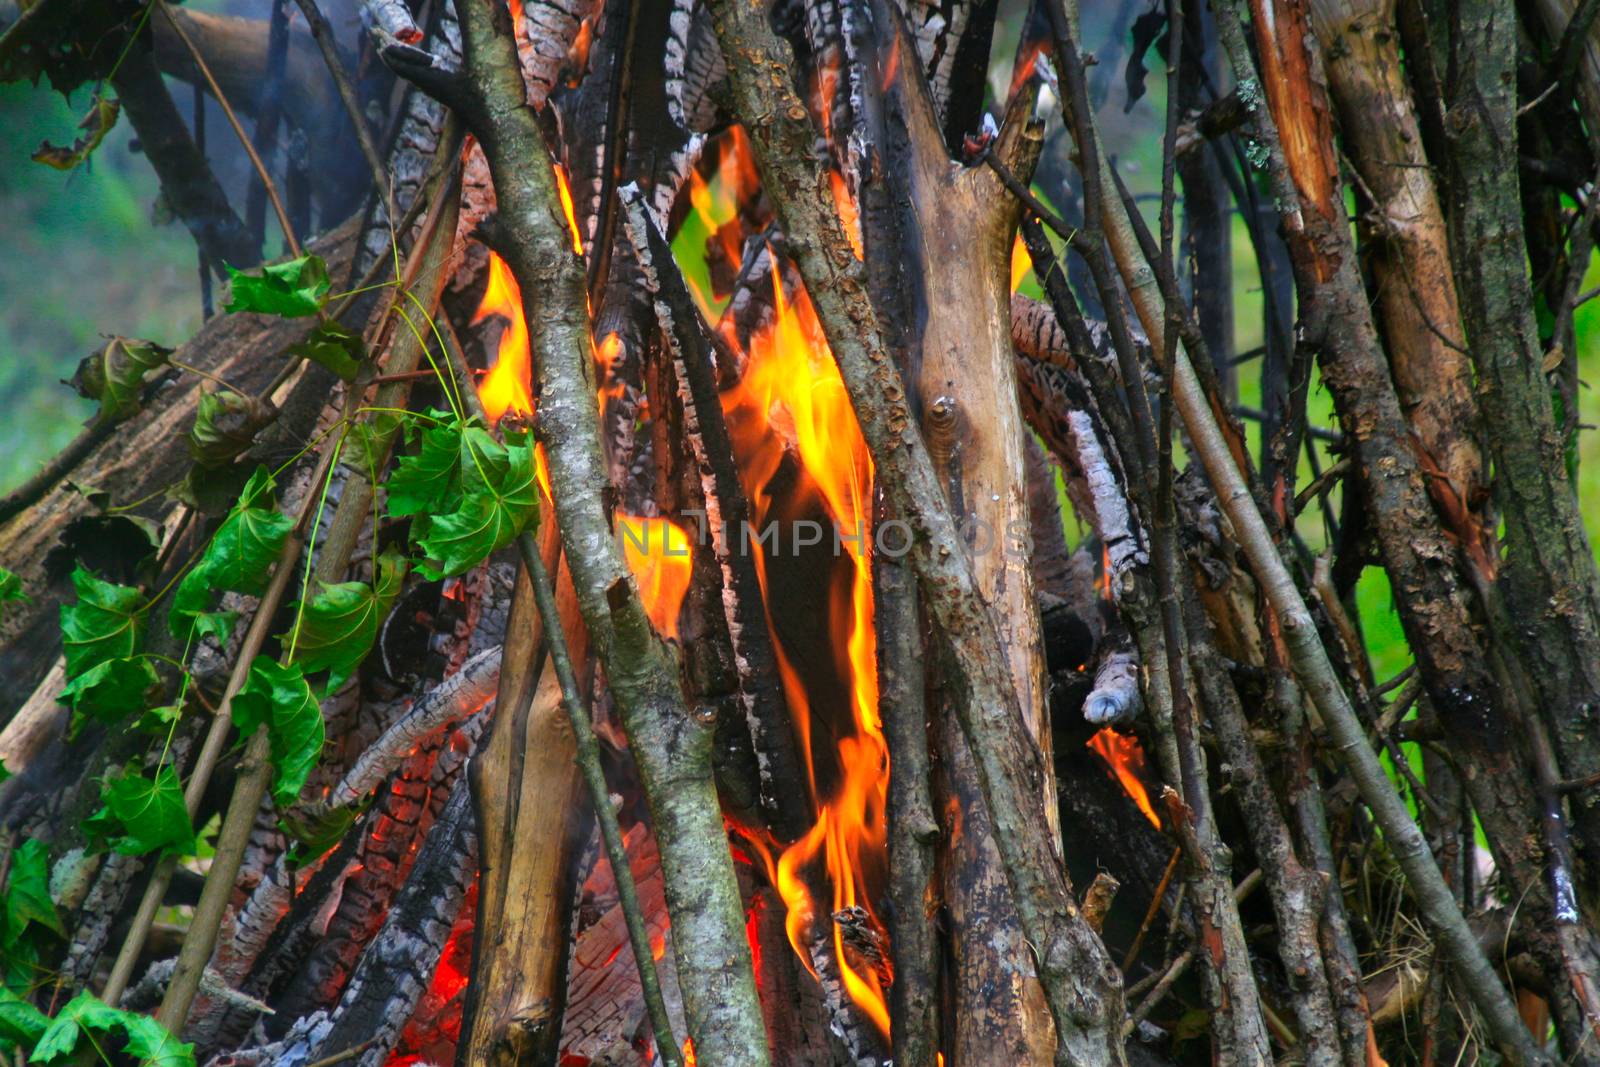 Fresh branches with green leaves still on burned in the bonfire at campsite.